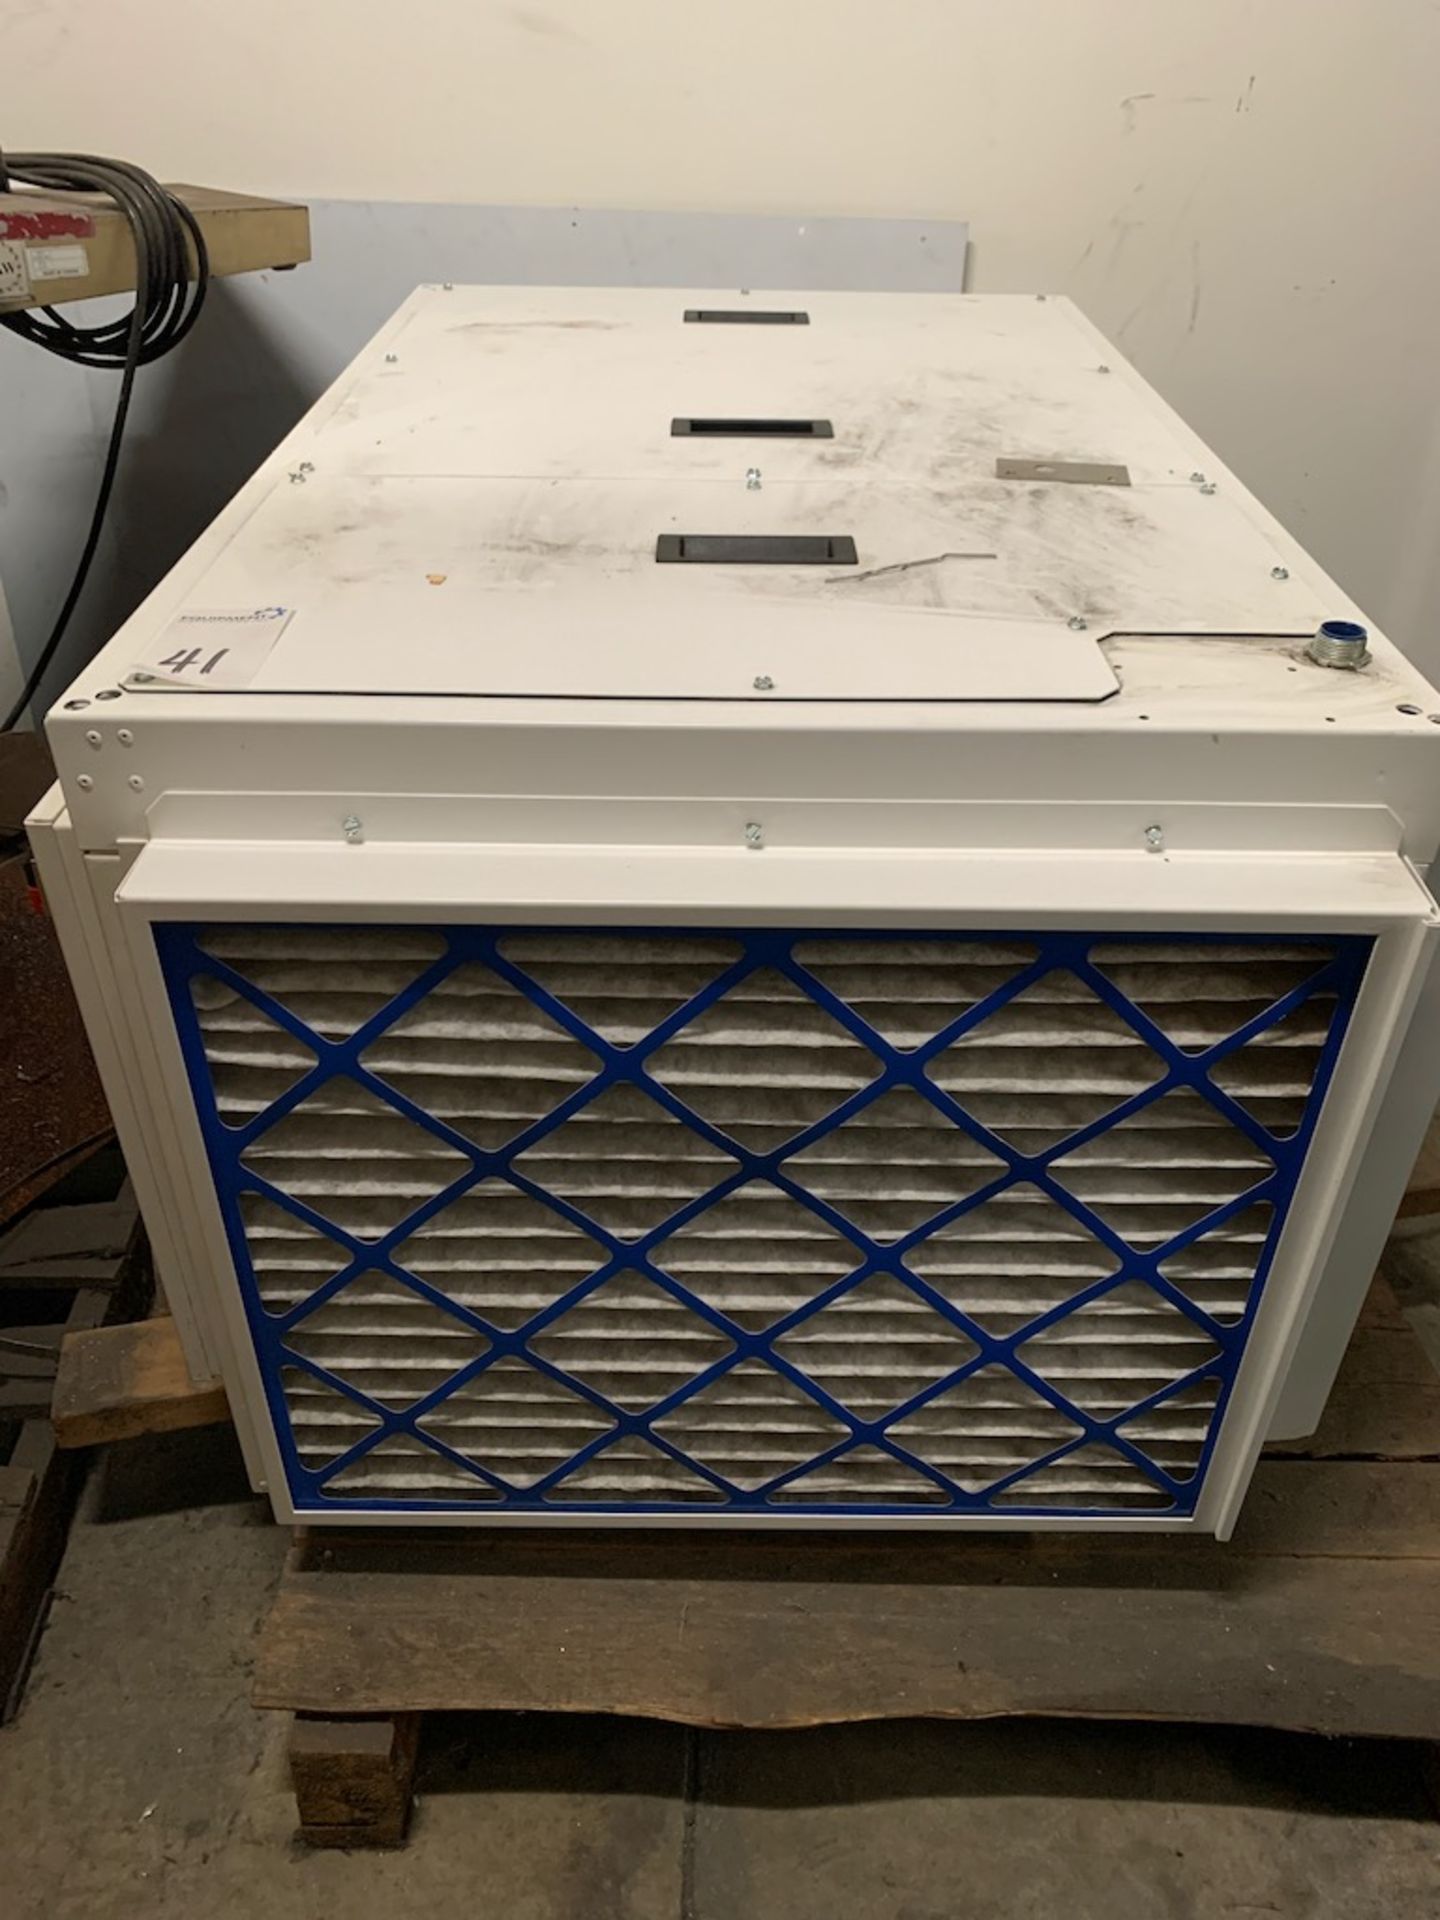 Air Purification Unit - Image 2 of 2